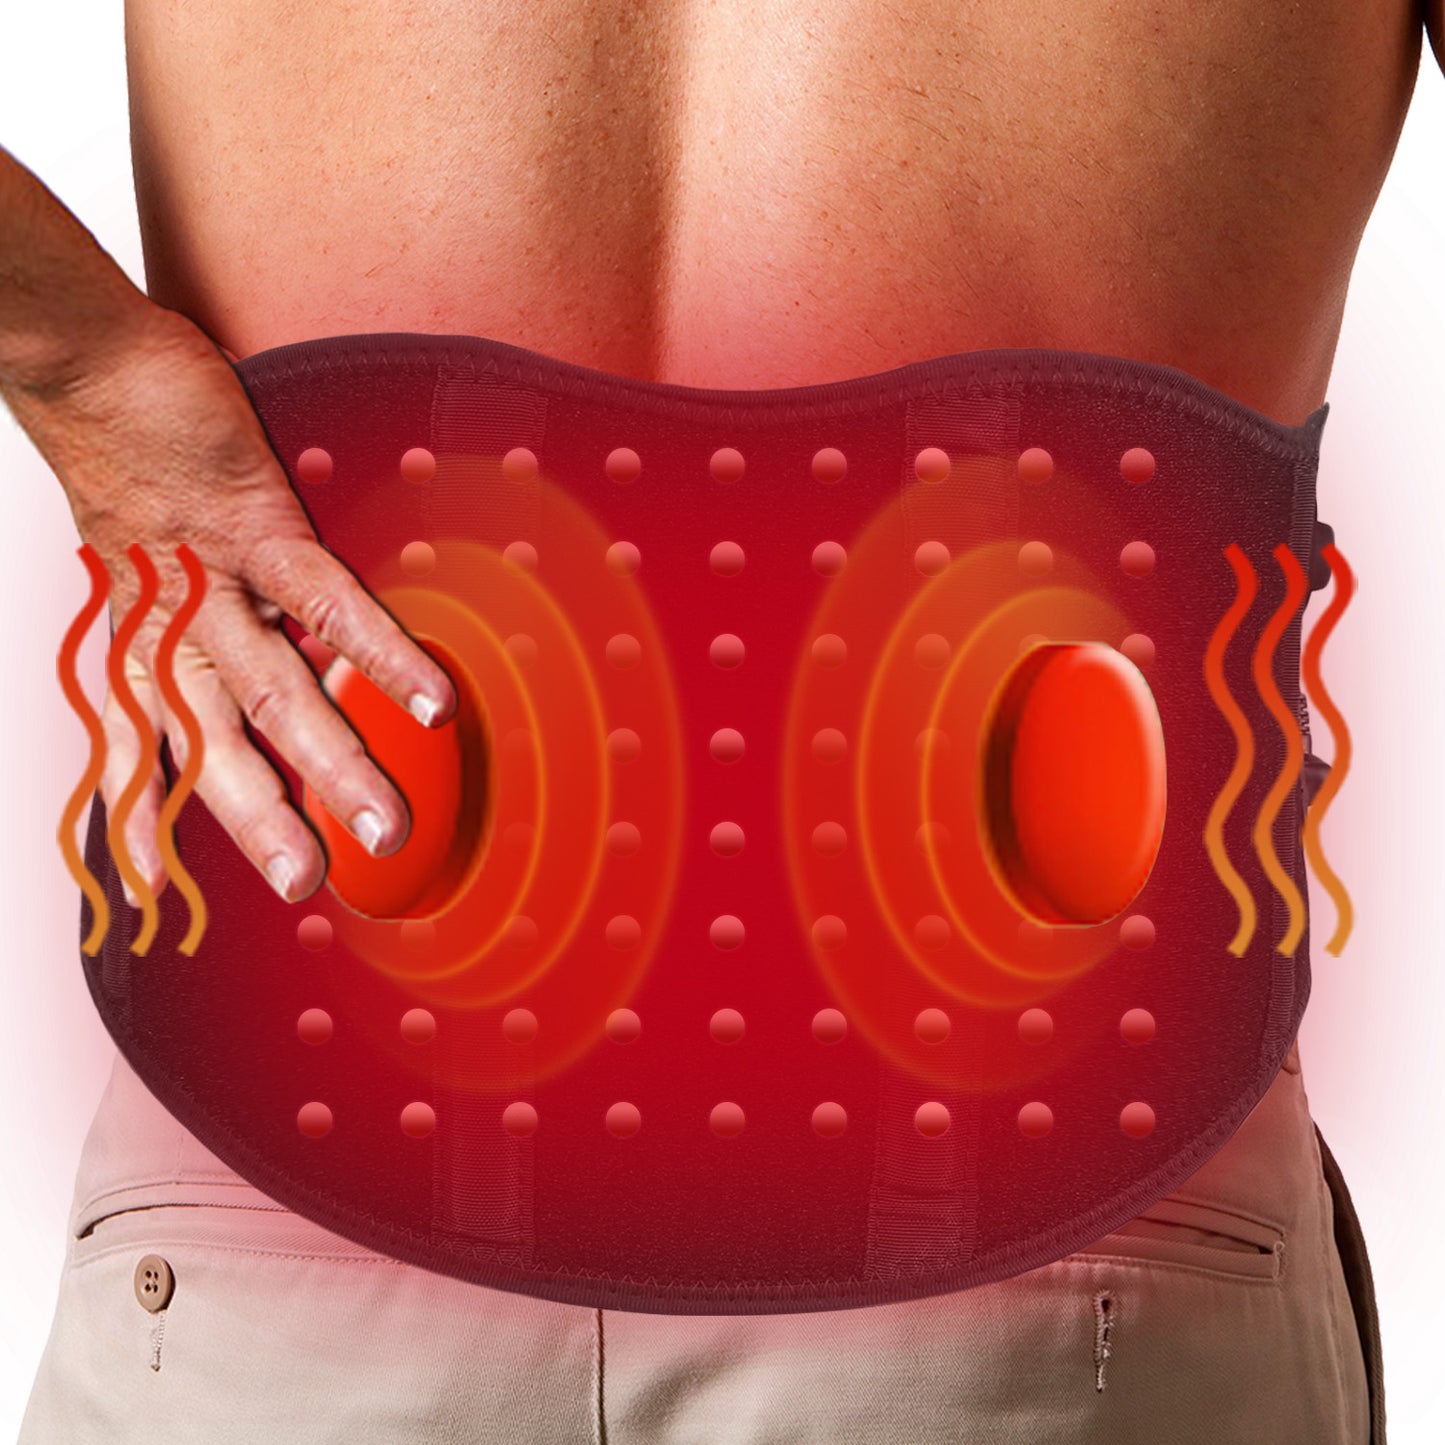 Heated Back Brace With Vibration Massage, Electric Lower Back Heating Pad  Massager